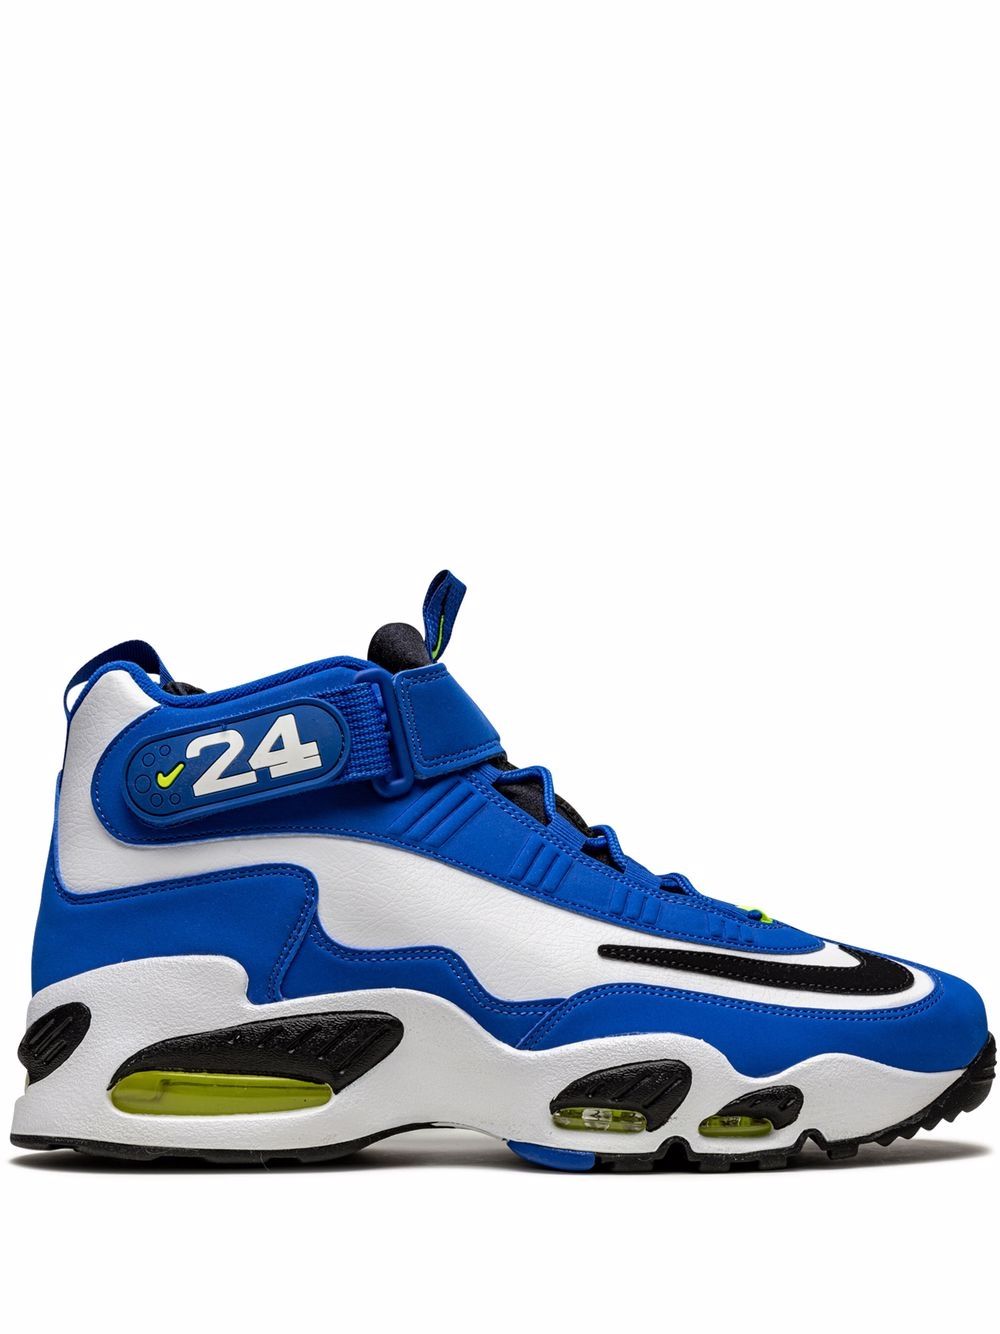 Image 1 of Nike Sneakers alte Air Griffey Max 1